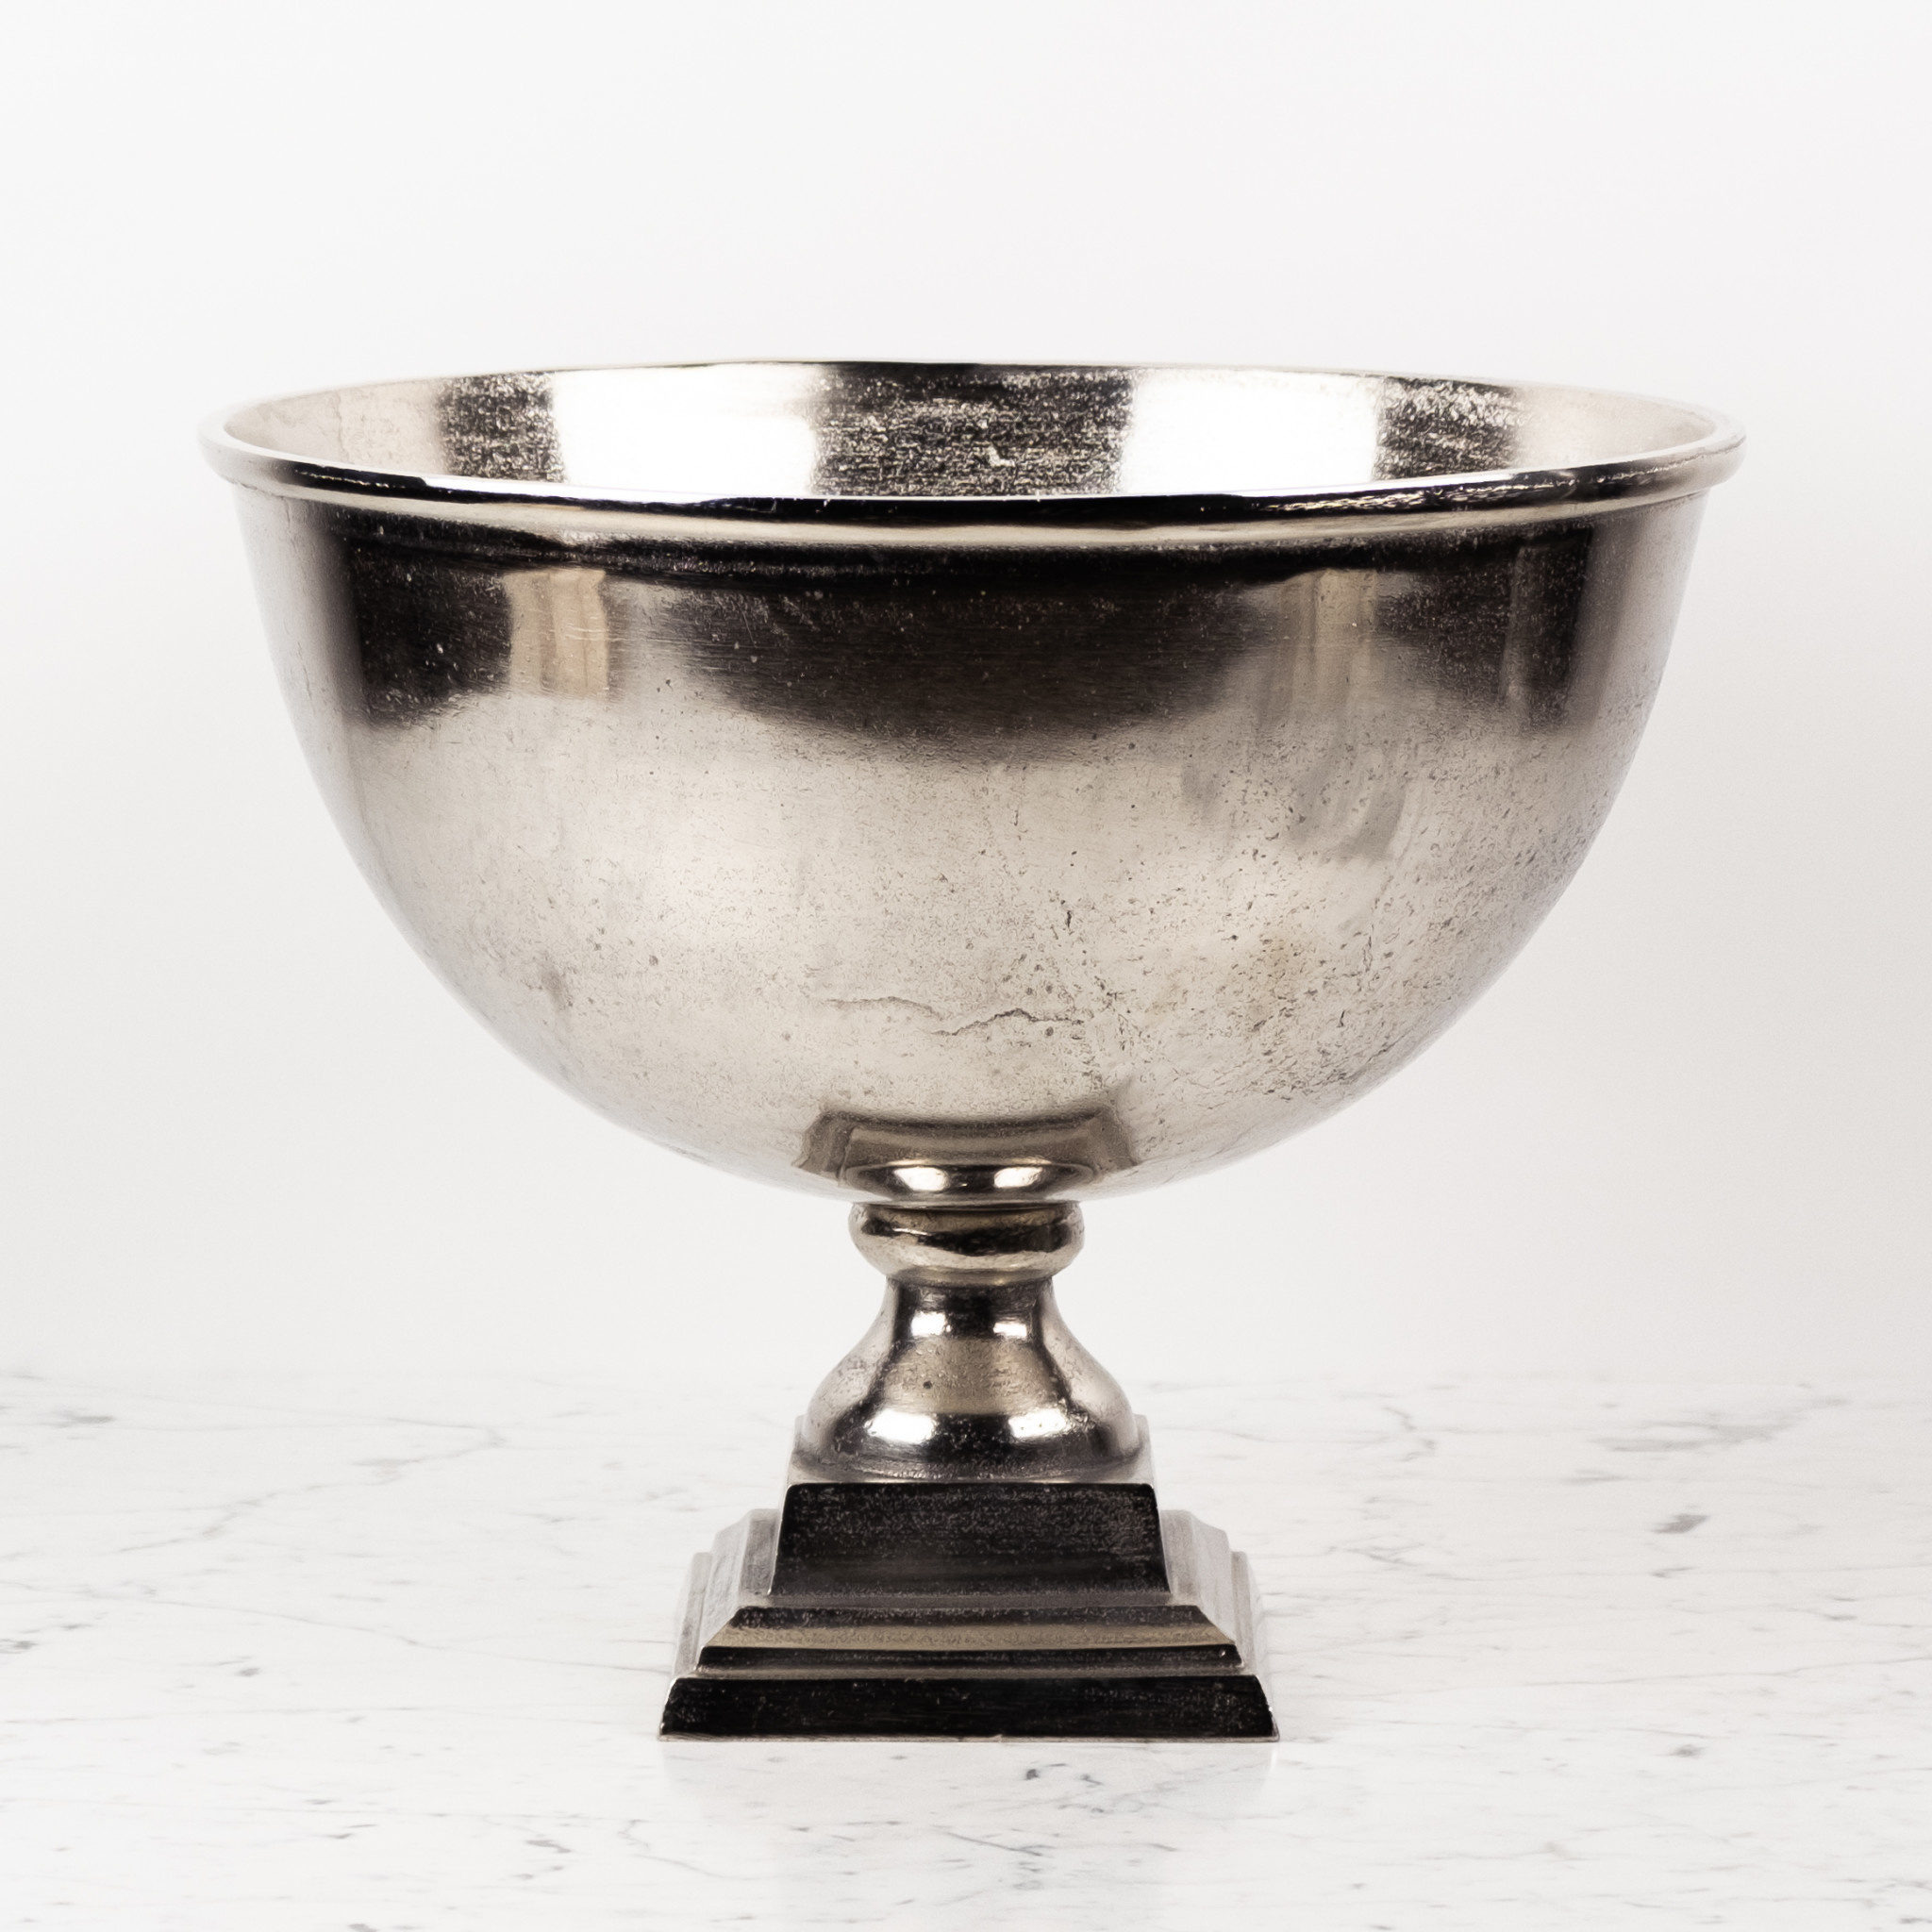 Large Nickel Champagne Bucket or Planter Vessel - Square Foot - 15 x 17"